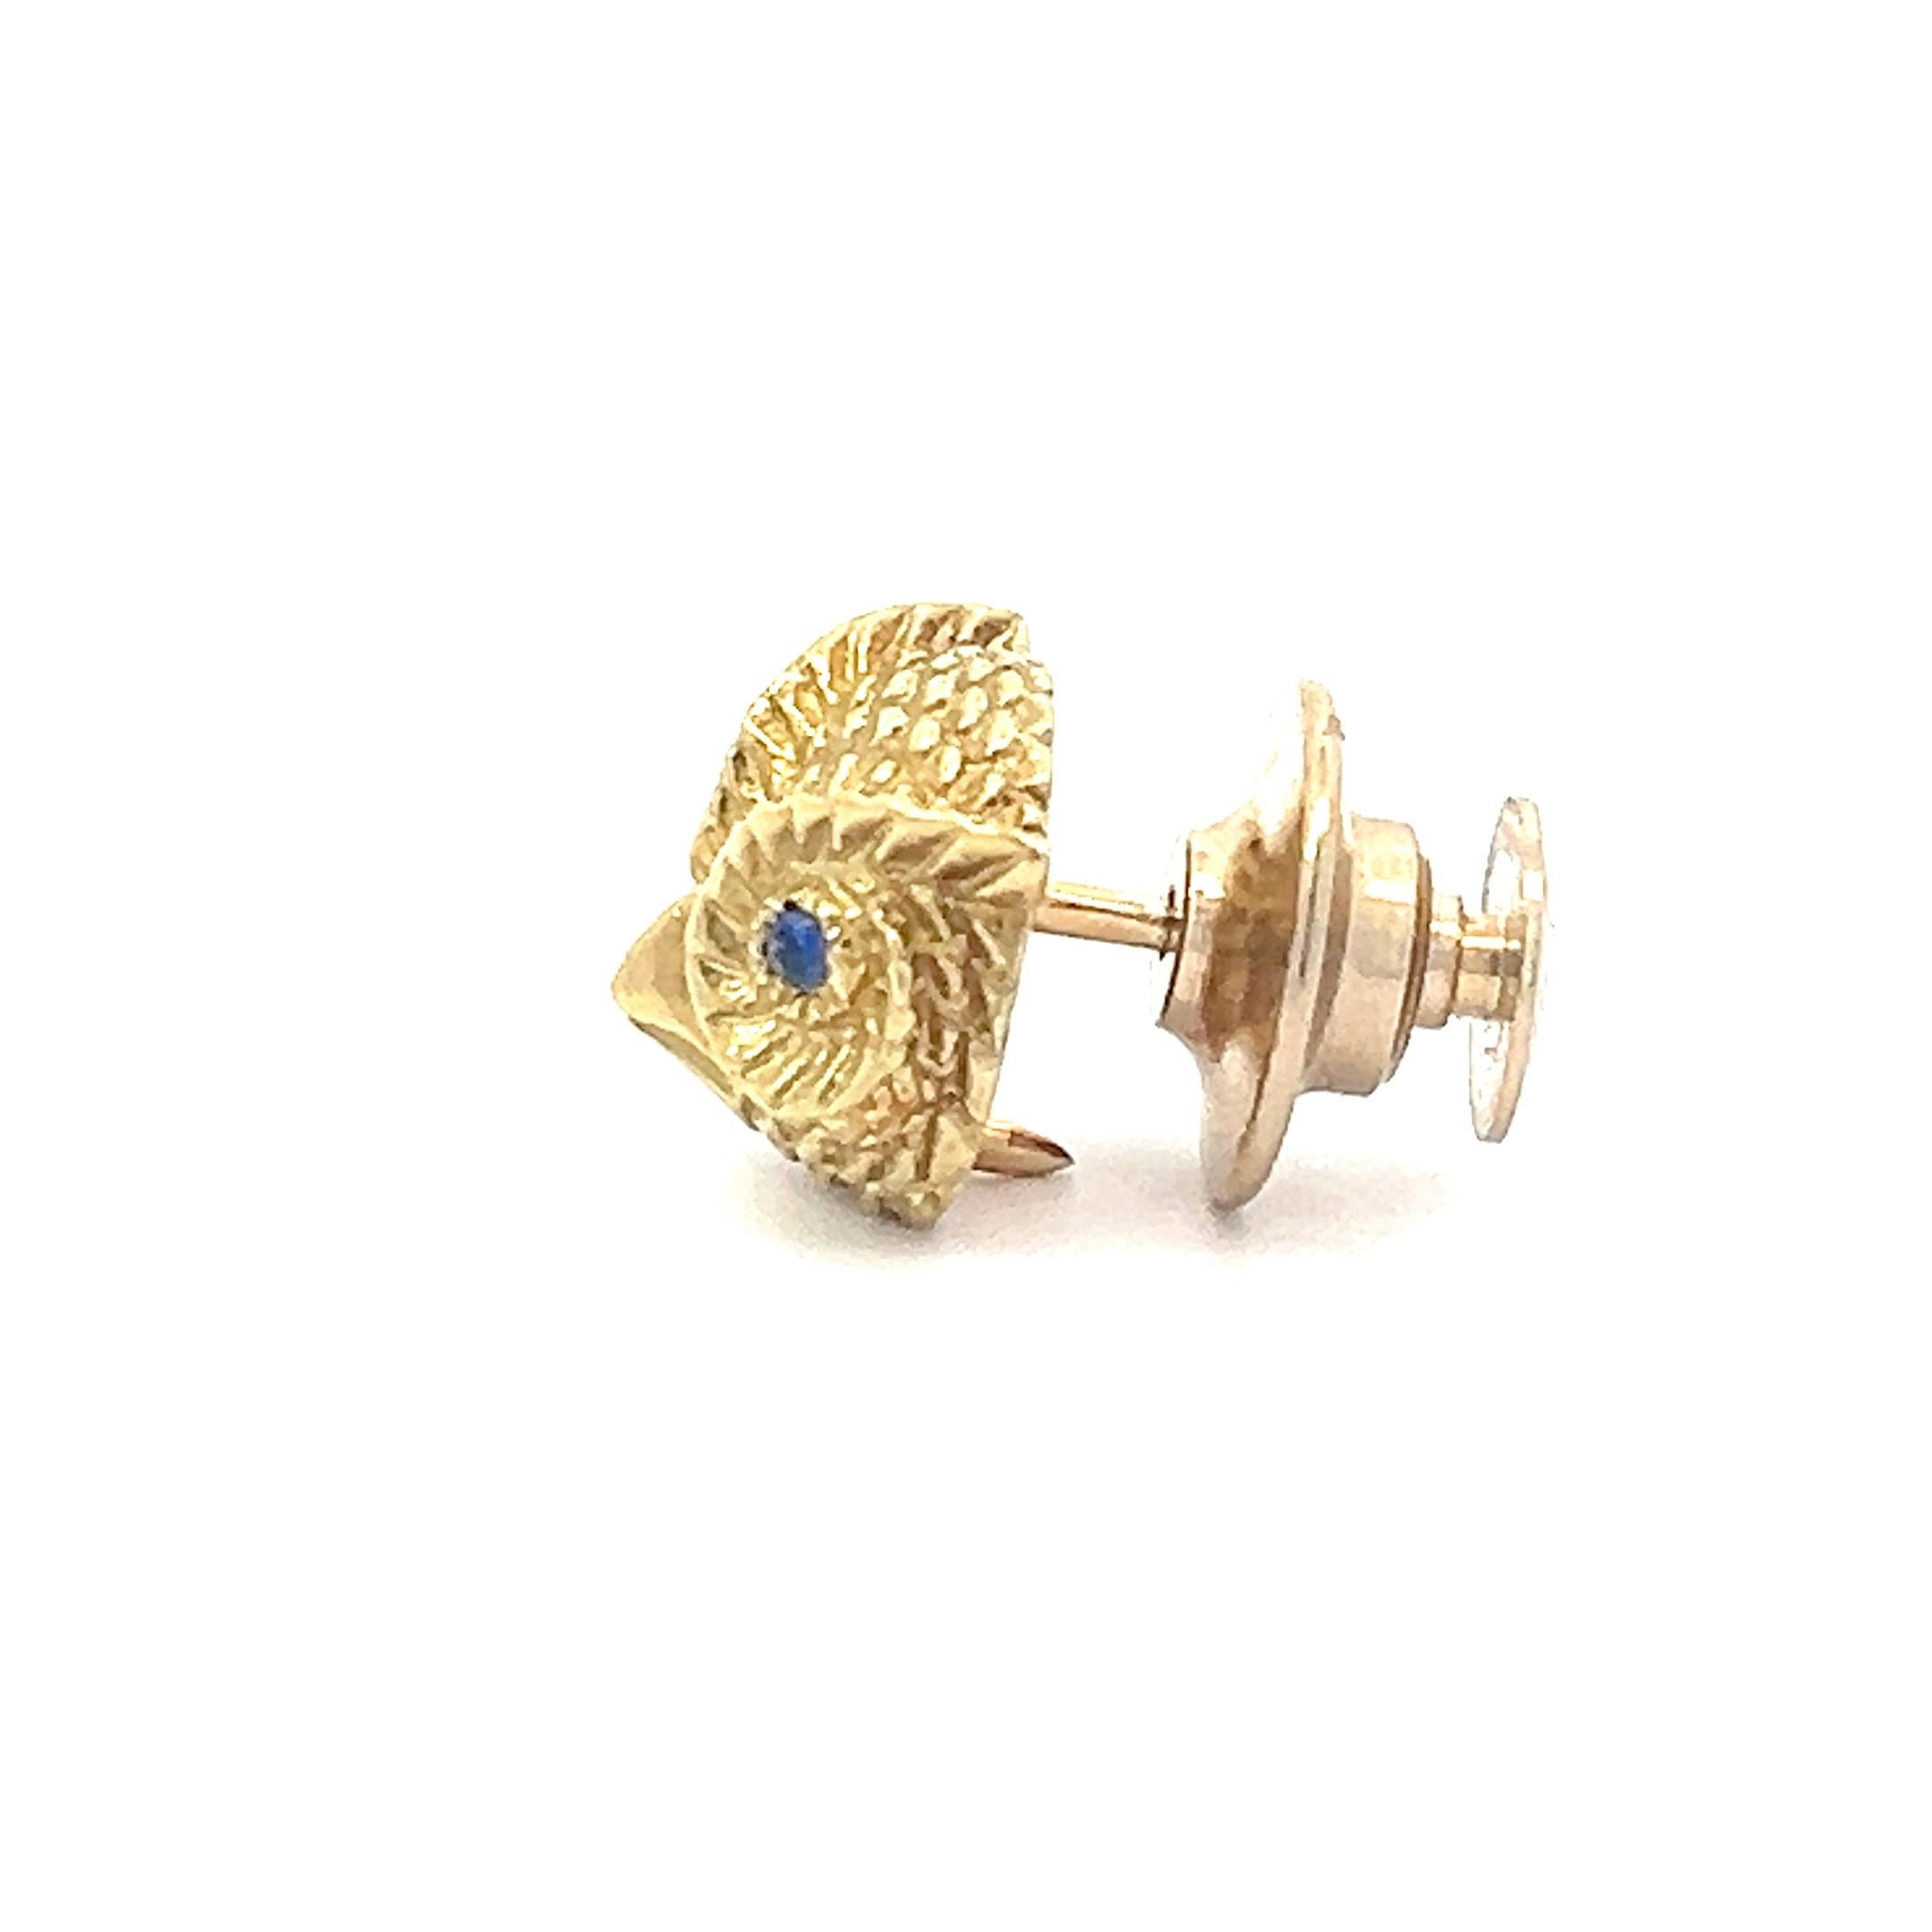 18k Yellow Gold Owl lapel Pin/ Tie Tack With Sapphire Eyes In New Condition For Sale In New York, NY